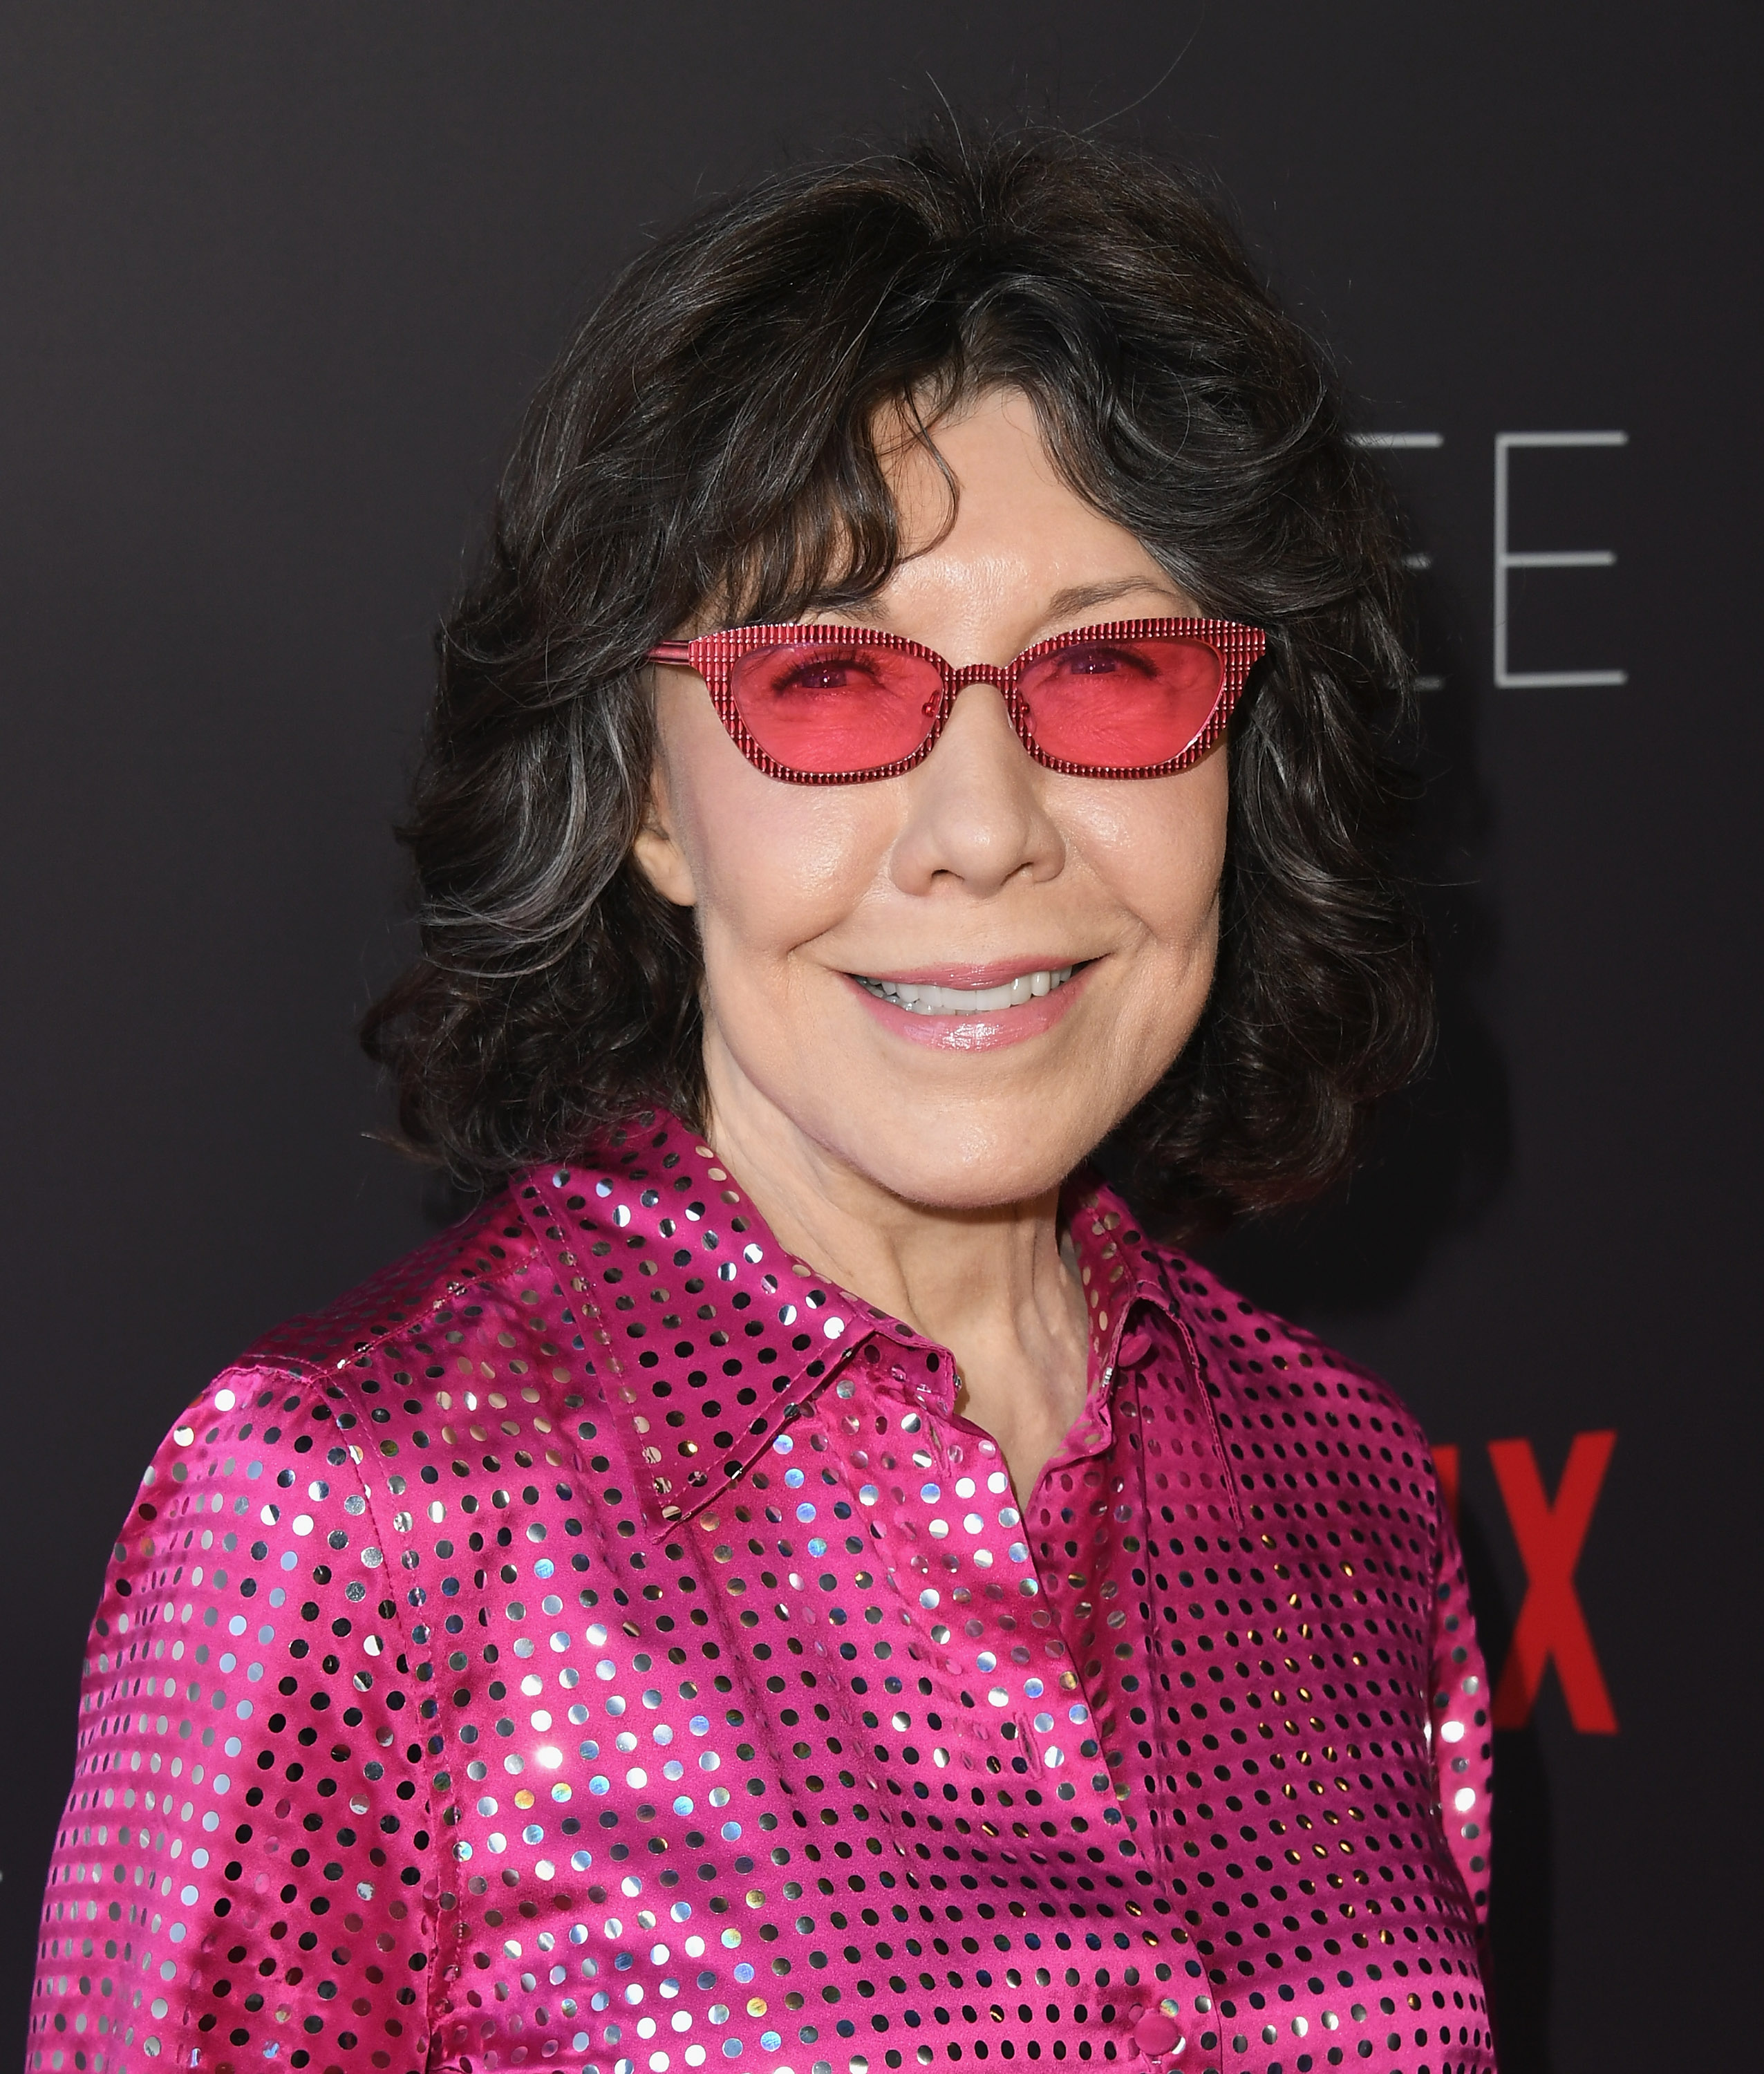 Lily Tomlin at the #NETFLIXFYSEE Event For "Grace And Frankie" in 2018 | Source: Getty Images